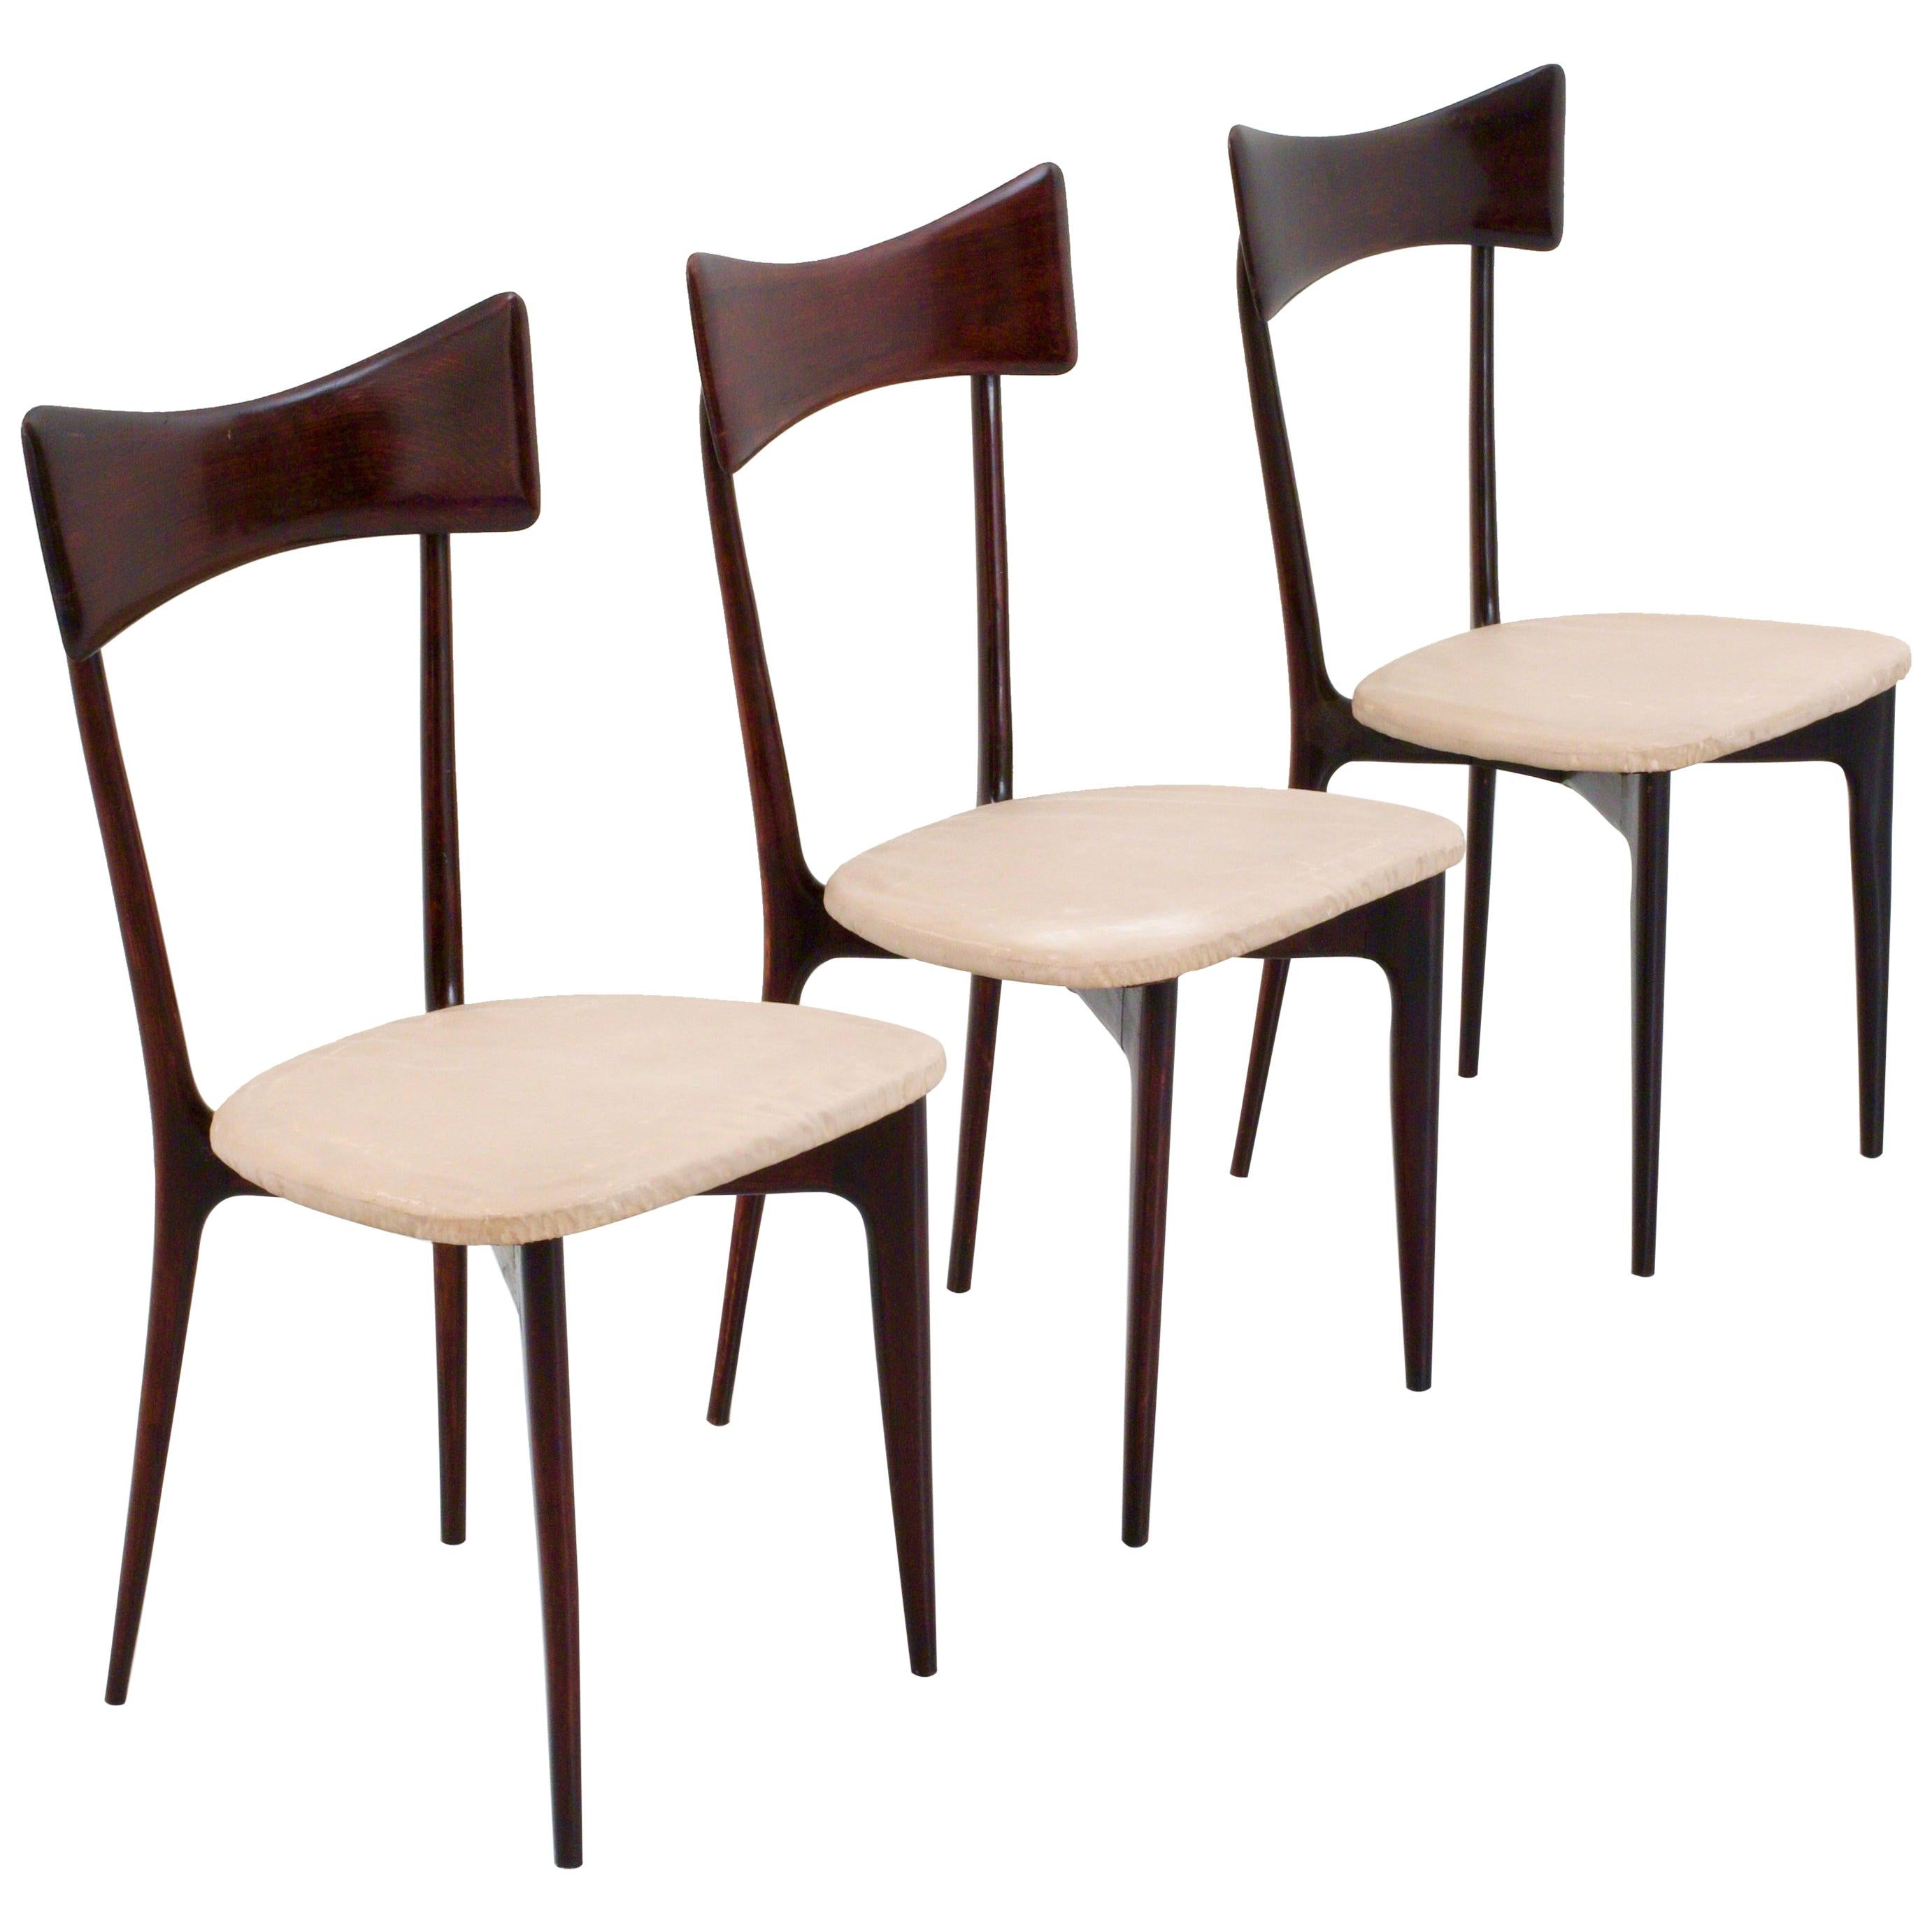 Set of 3 Dining Chairs by Ico & Luisa Parisi for Ariberto Colombo, Italy, 1955